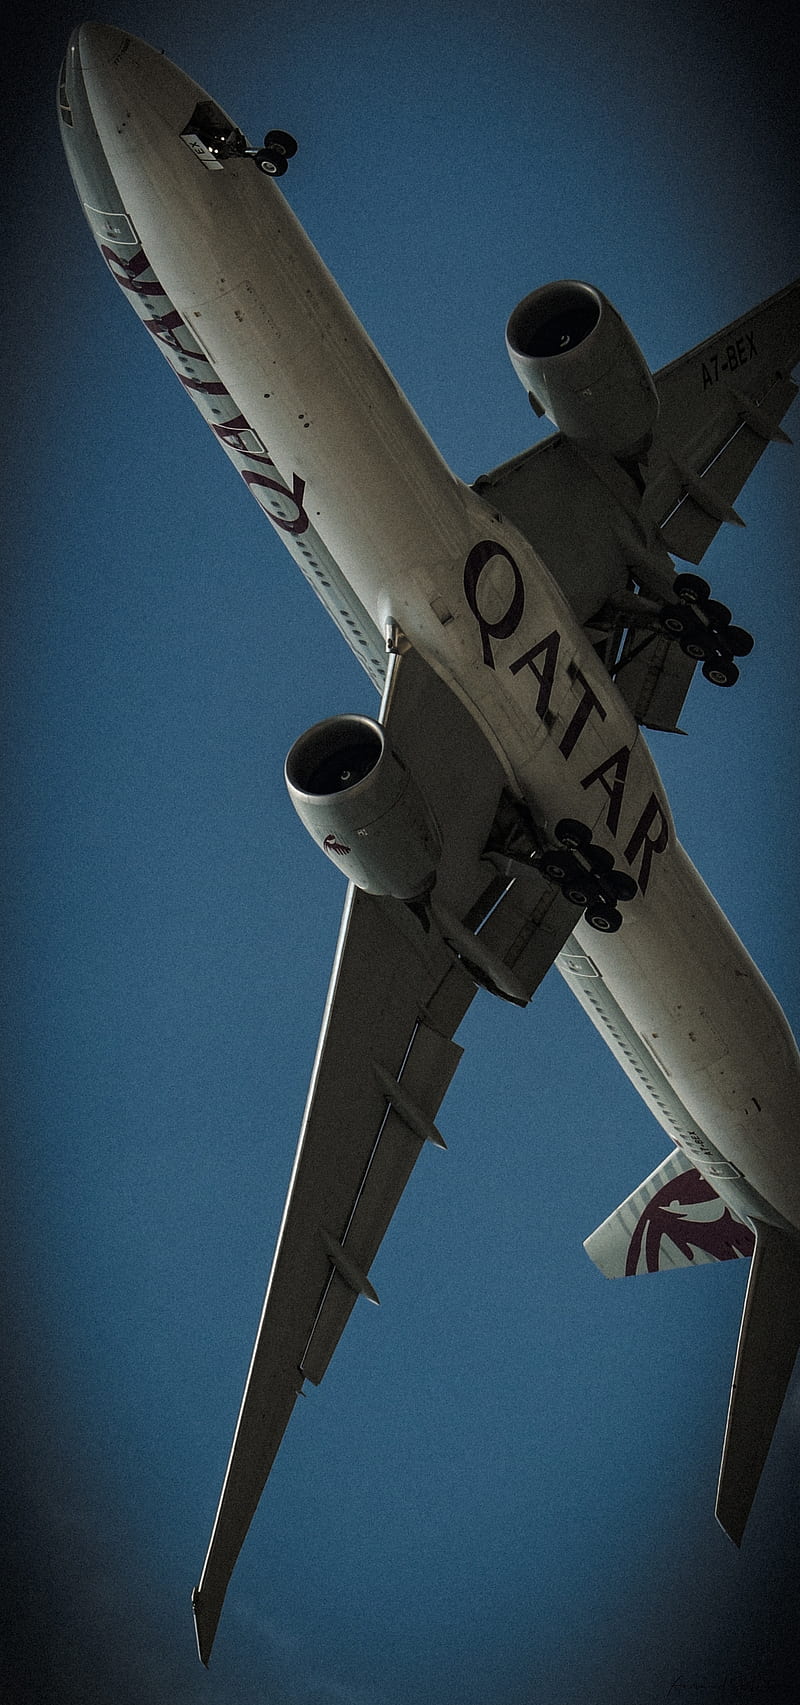 750x1334 Boeing 777 Wallpapers for Apple IPhone 6, 6S, 7, 8 [Retina HD]